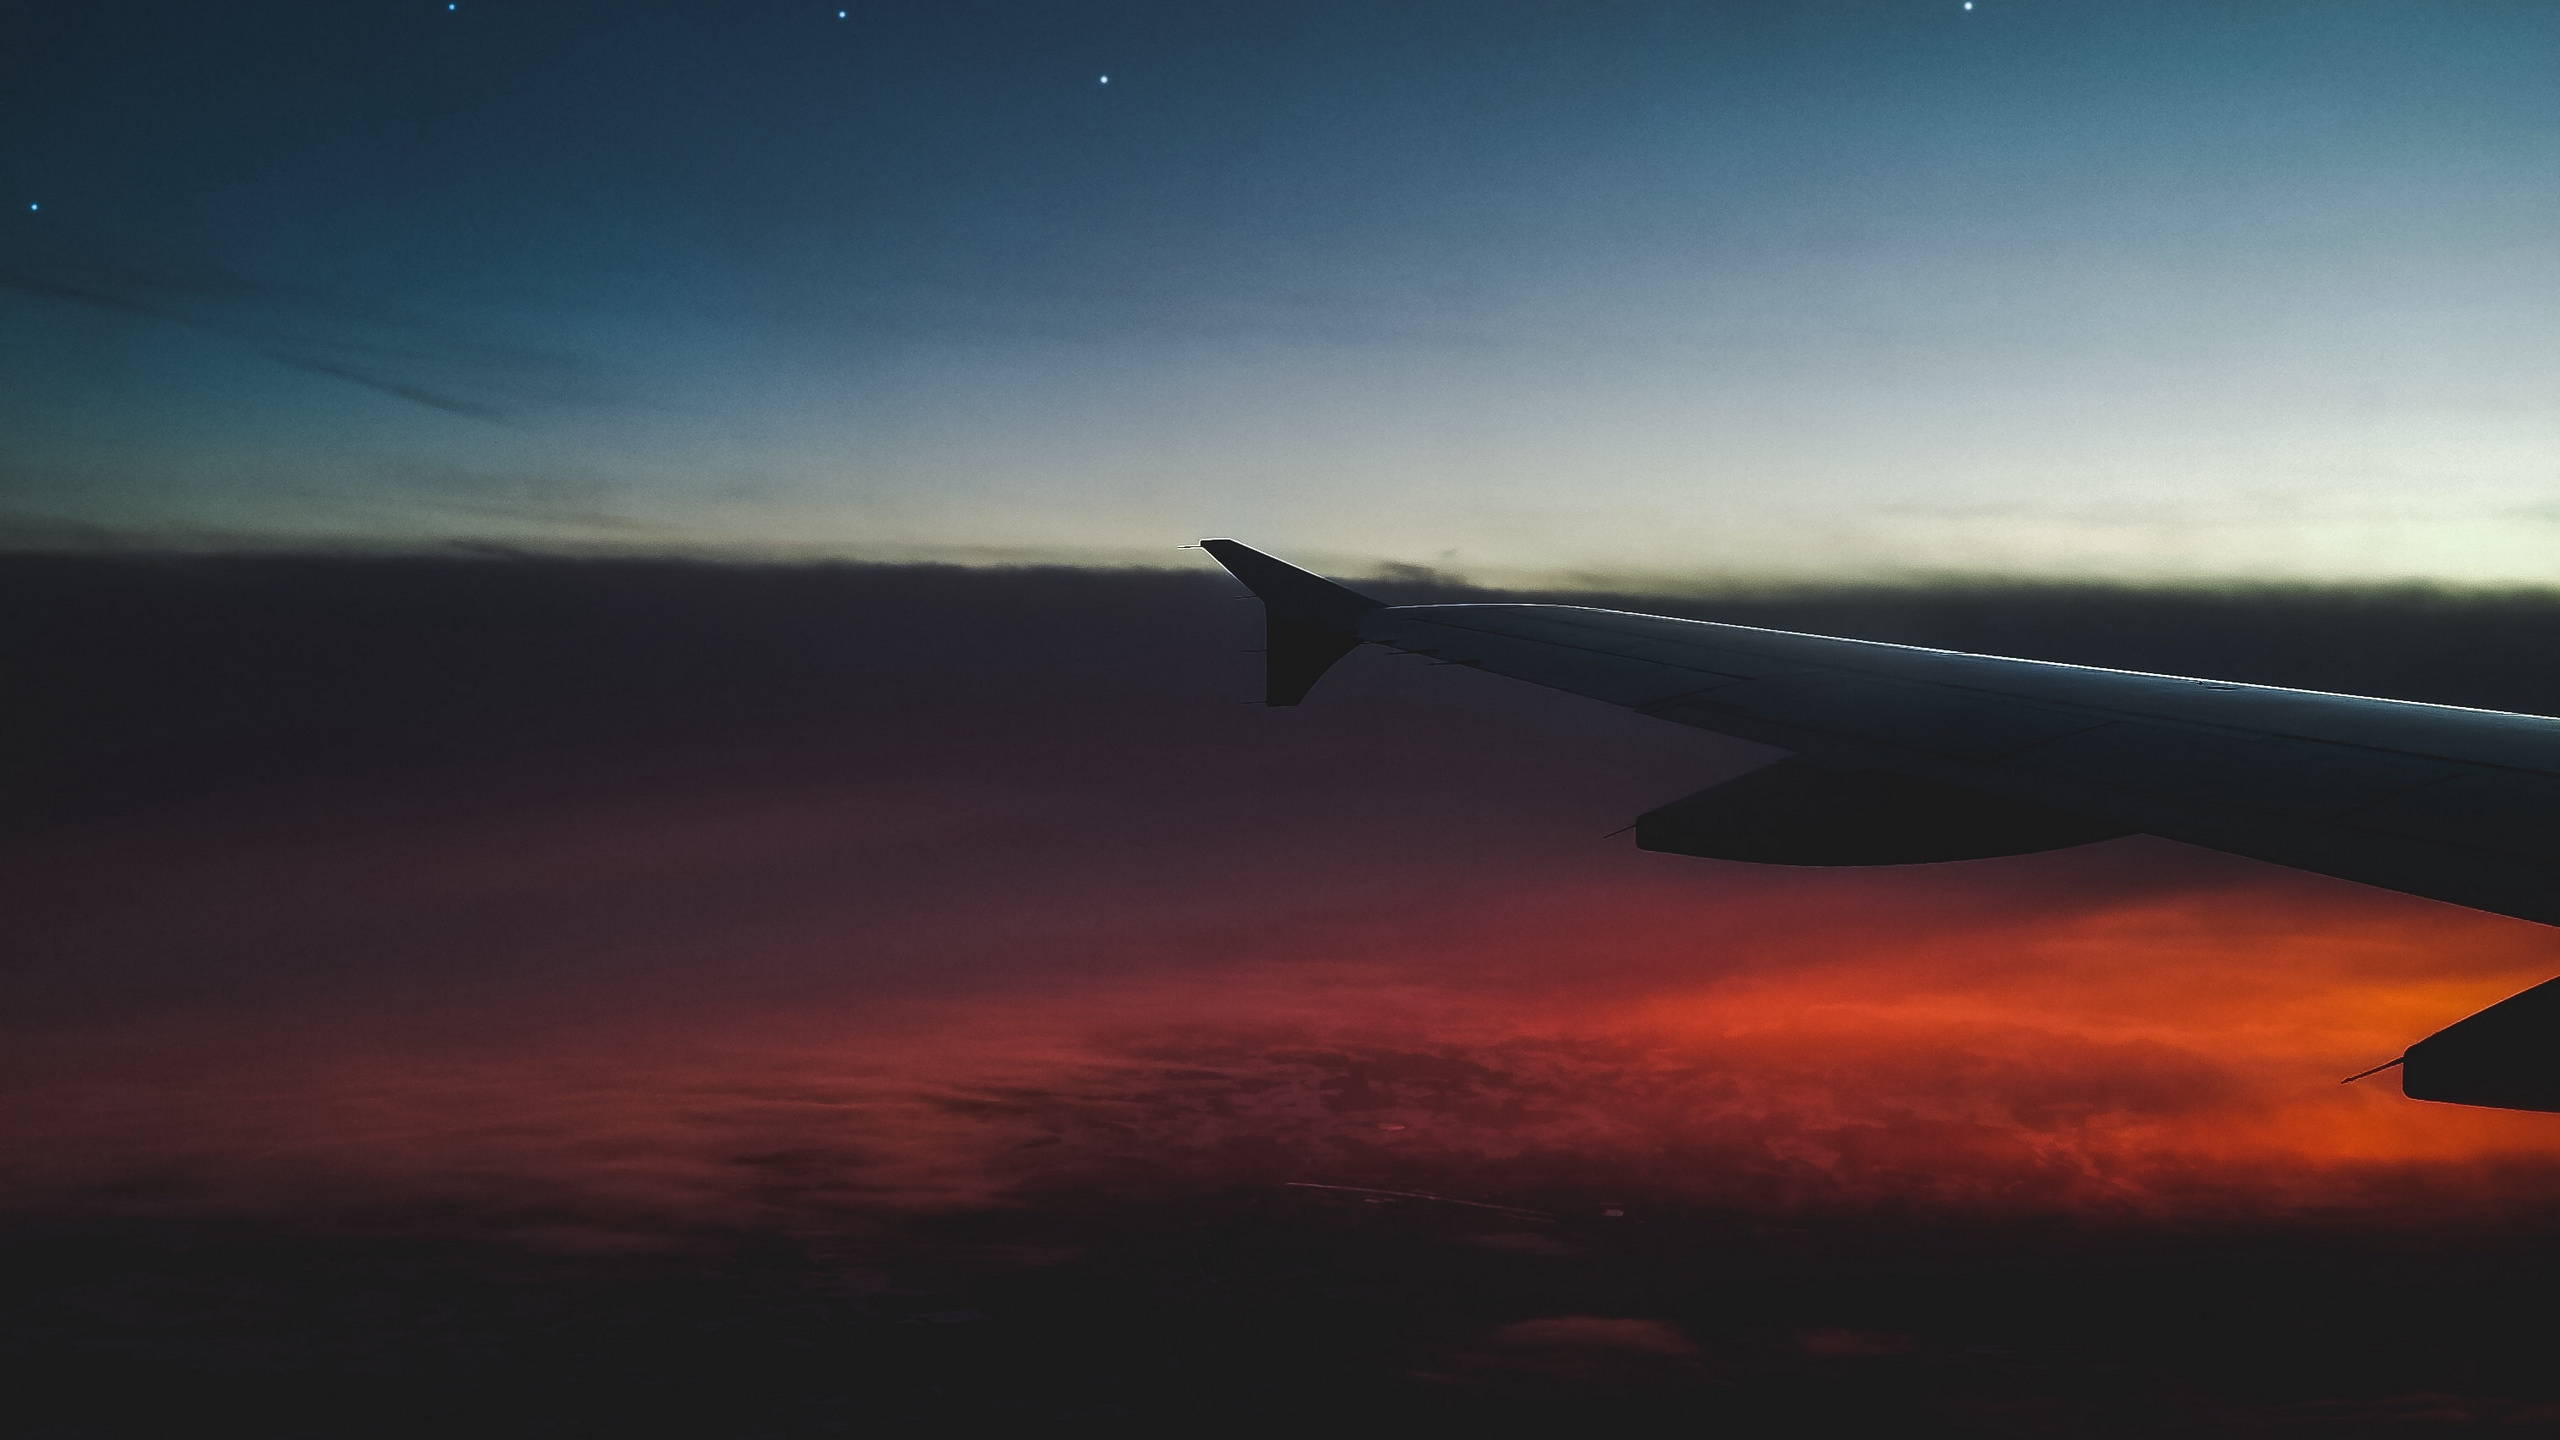 Airplane Wing Over The Clouds During Sunset. Wallpaper in 2560x1440 Resolution